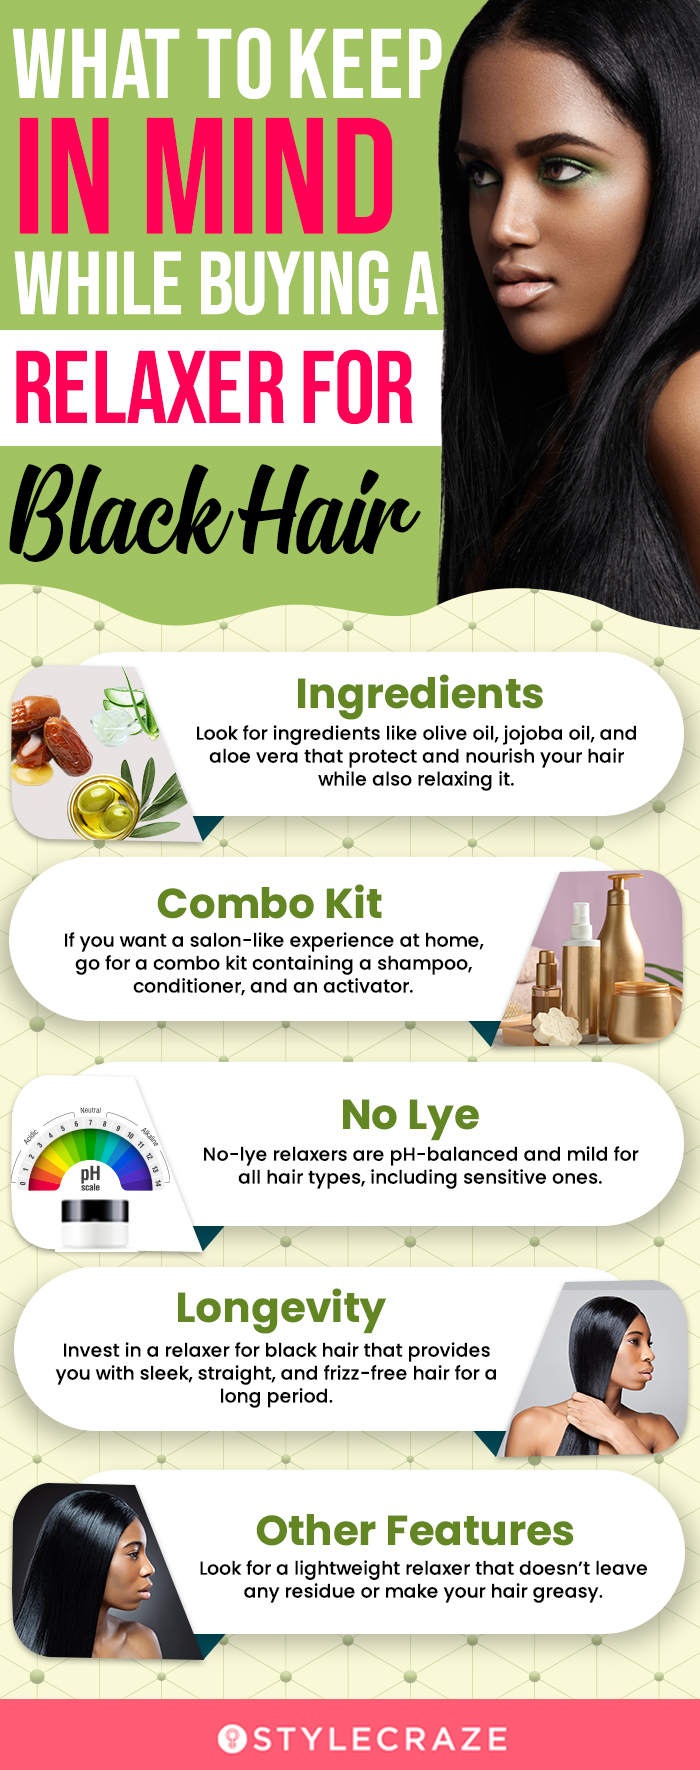 What To Keep In Mind While Buying Relaxer For Black Hair (infographic)